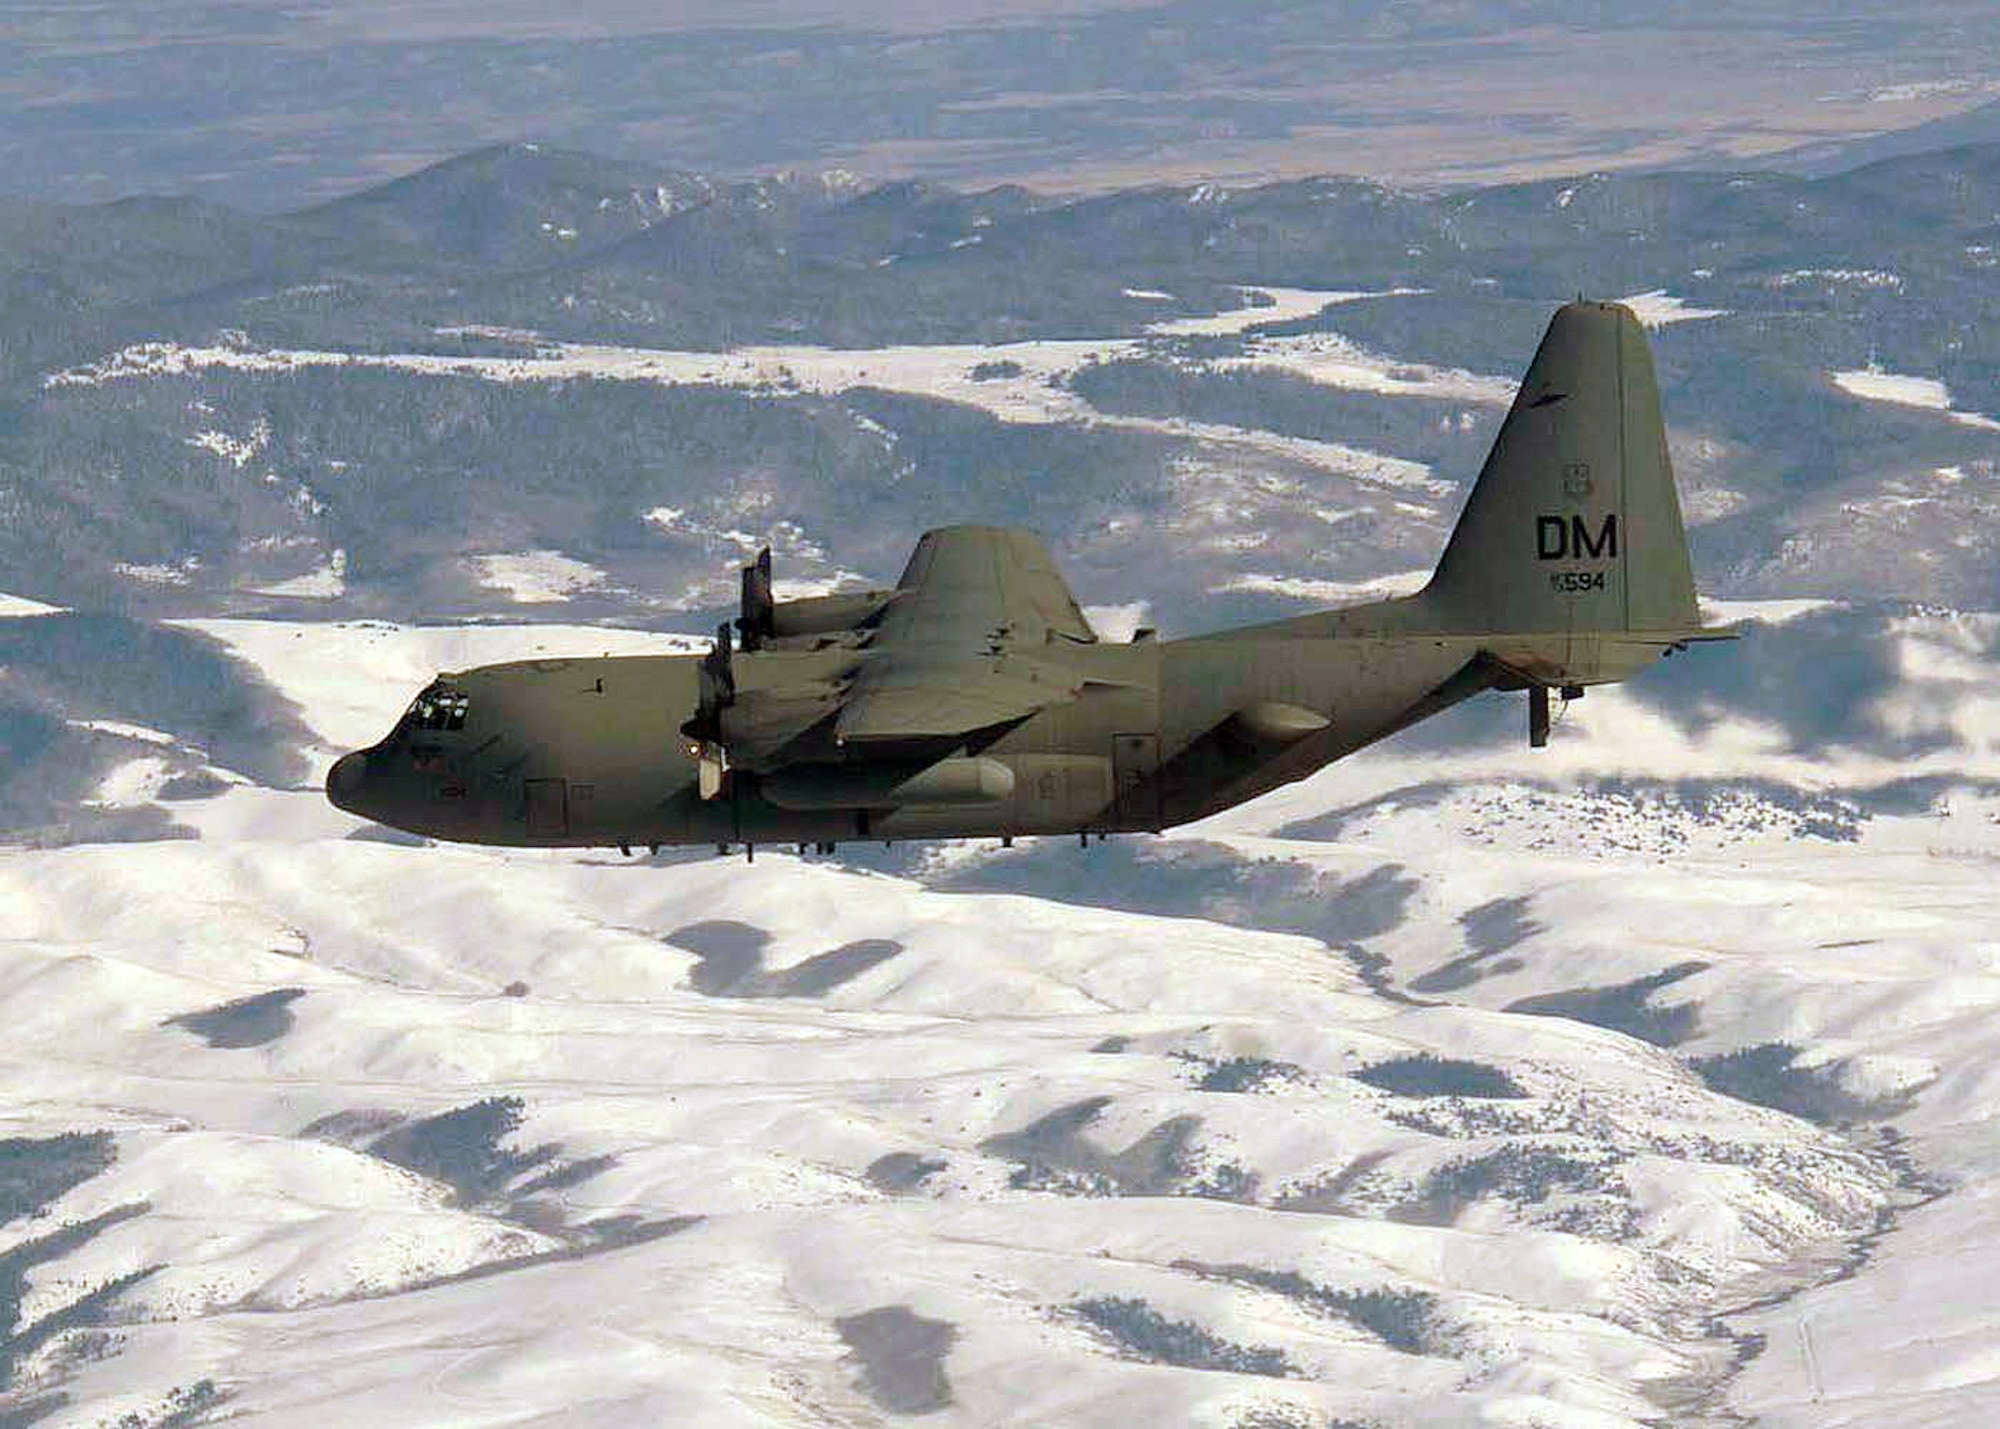 OVER COLORADO (AFPN) -- An EC-130H Compass Call aircraft flies over snow-covers hills during a training mission. The aircraft is from the 55th Electronic Combat Group at Davis-Monthan Air Force Base, Ariz. (U.S. Air Force photo by Airman 1st Class Christina D. Ponte) 